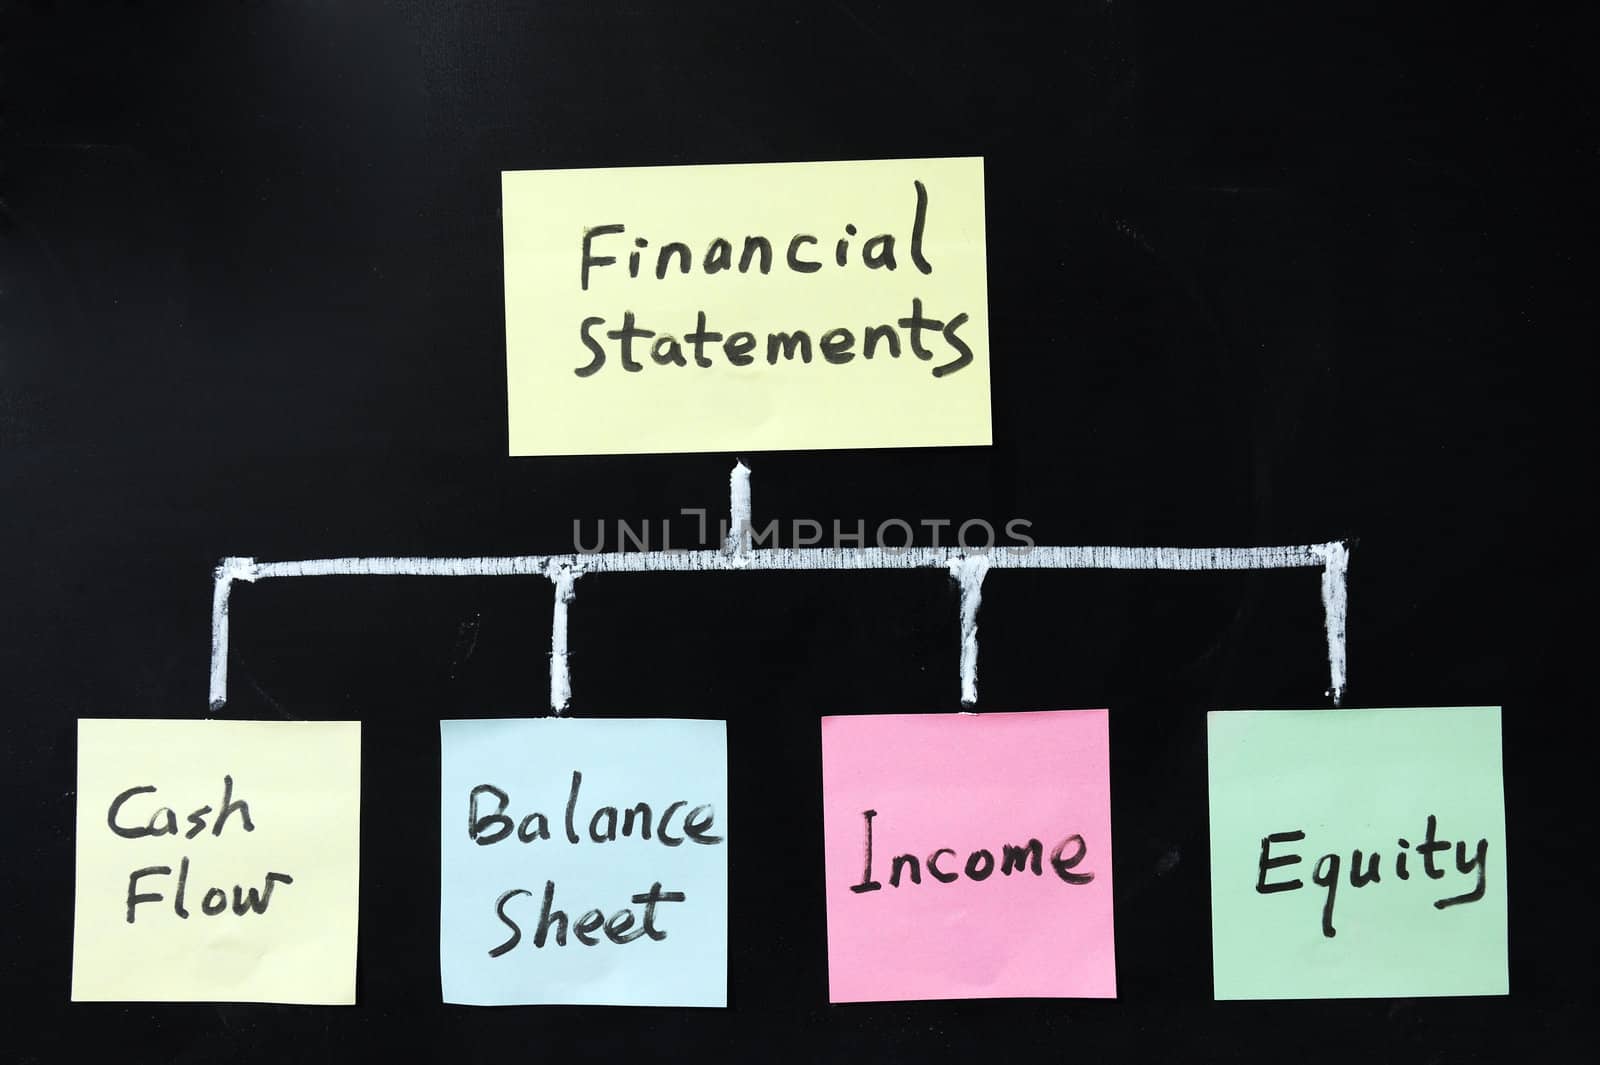 Conceptional drawing of financial statements